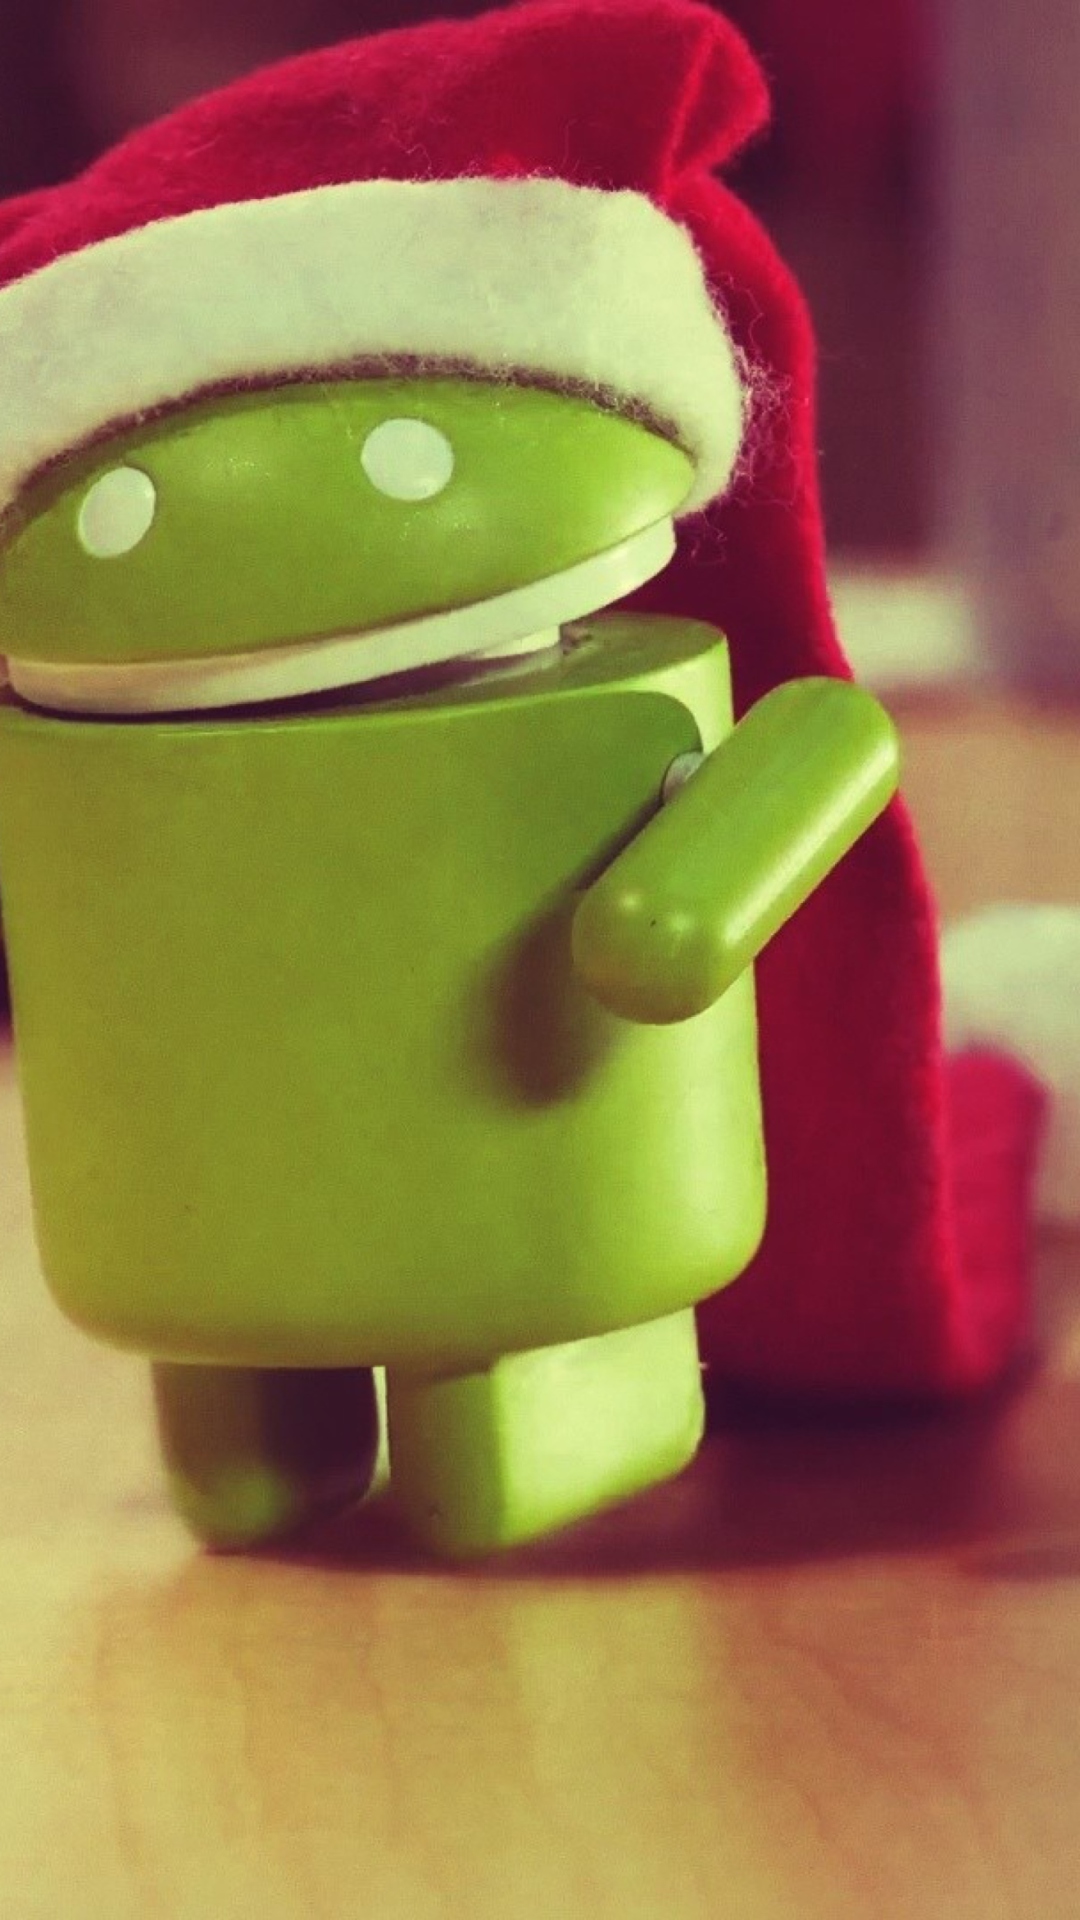 Android Christmas wallpaper 1080x1920